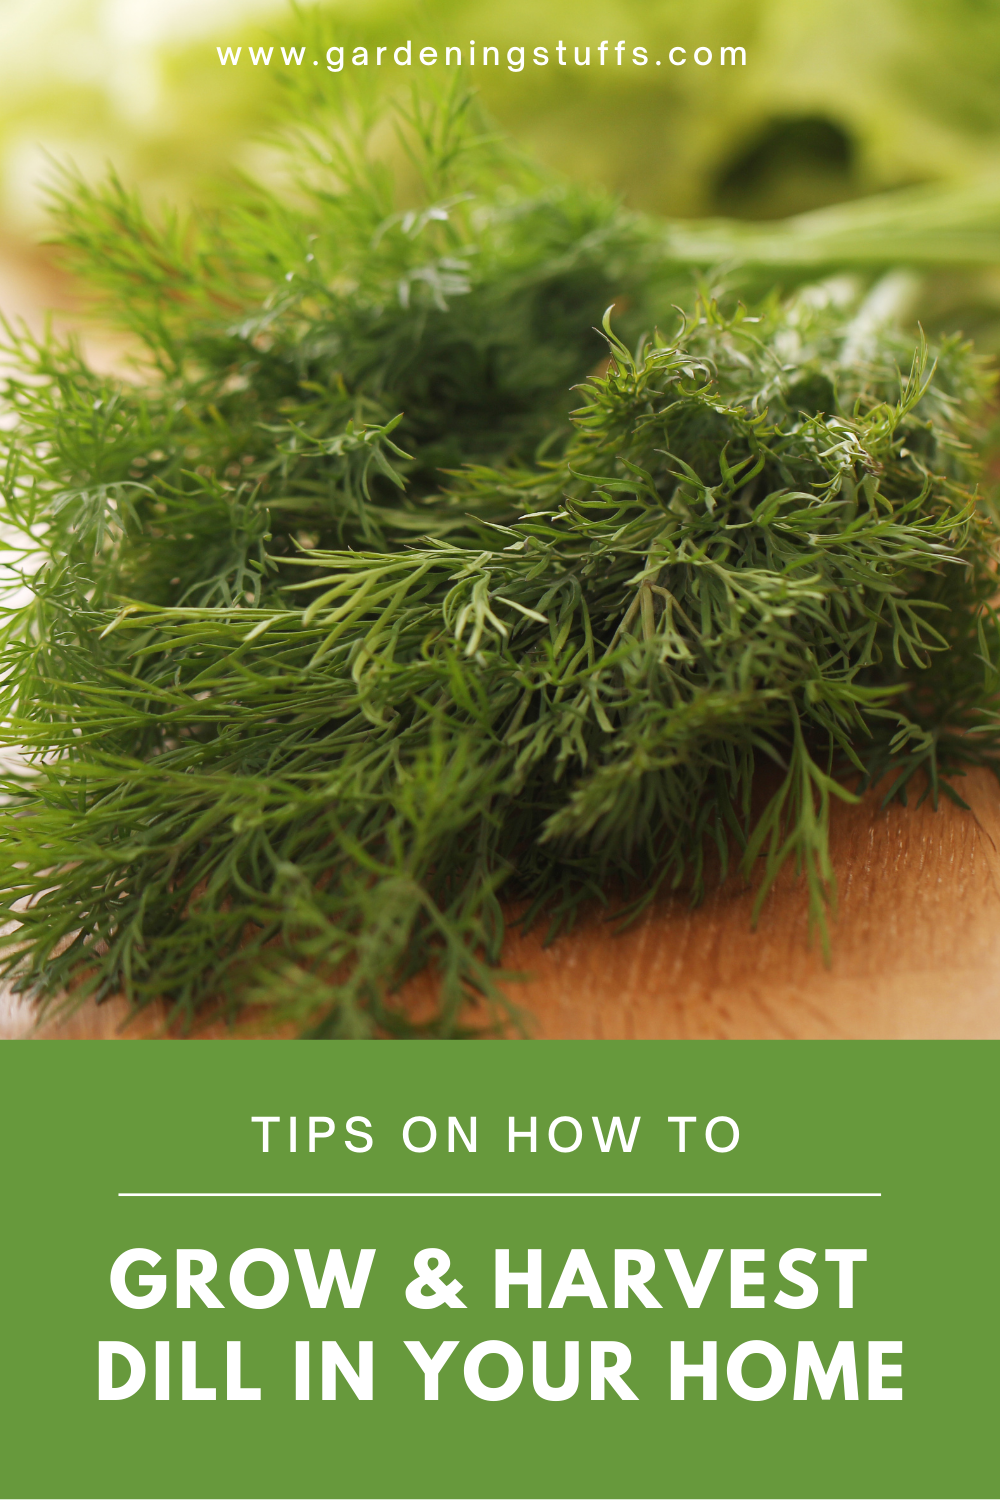 To make a dill dip sauce, the best way to use your fresh dill is right from your garden. This herb is super easy to grow even for people who don't think they have green thumbs. Find out how to grow and harvest dill so you can now explore your cooking skills anytime and save money since you brought the grocery store to your house.